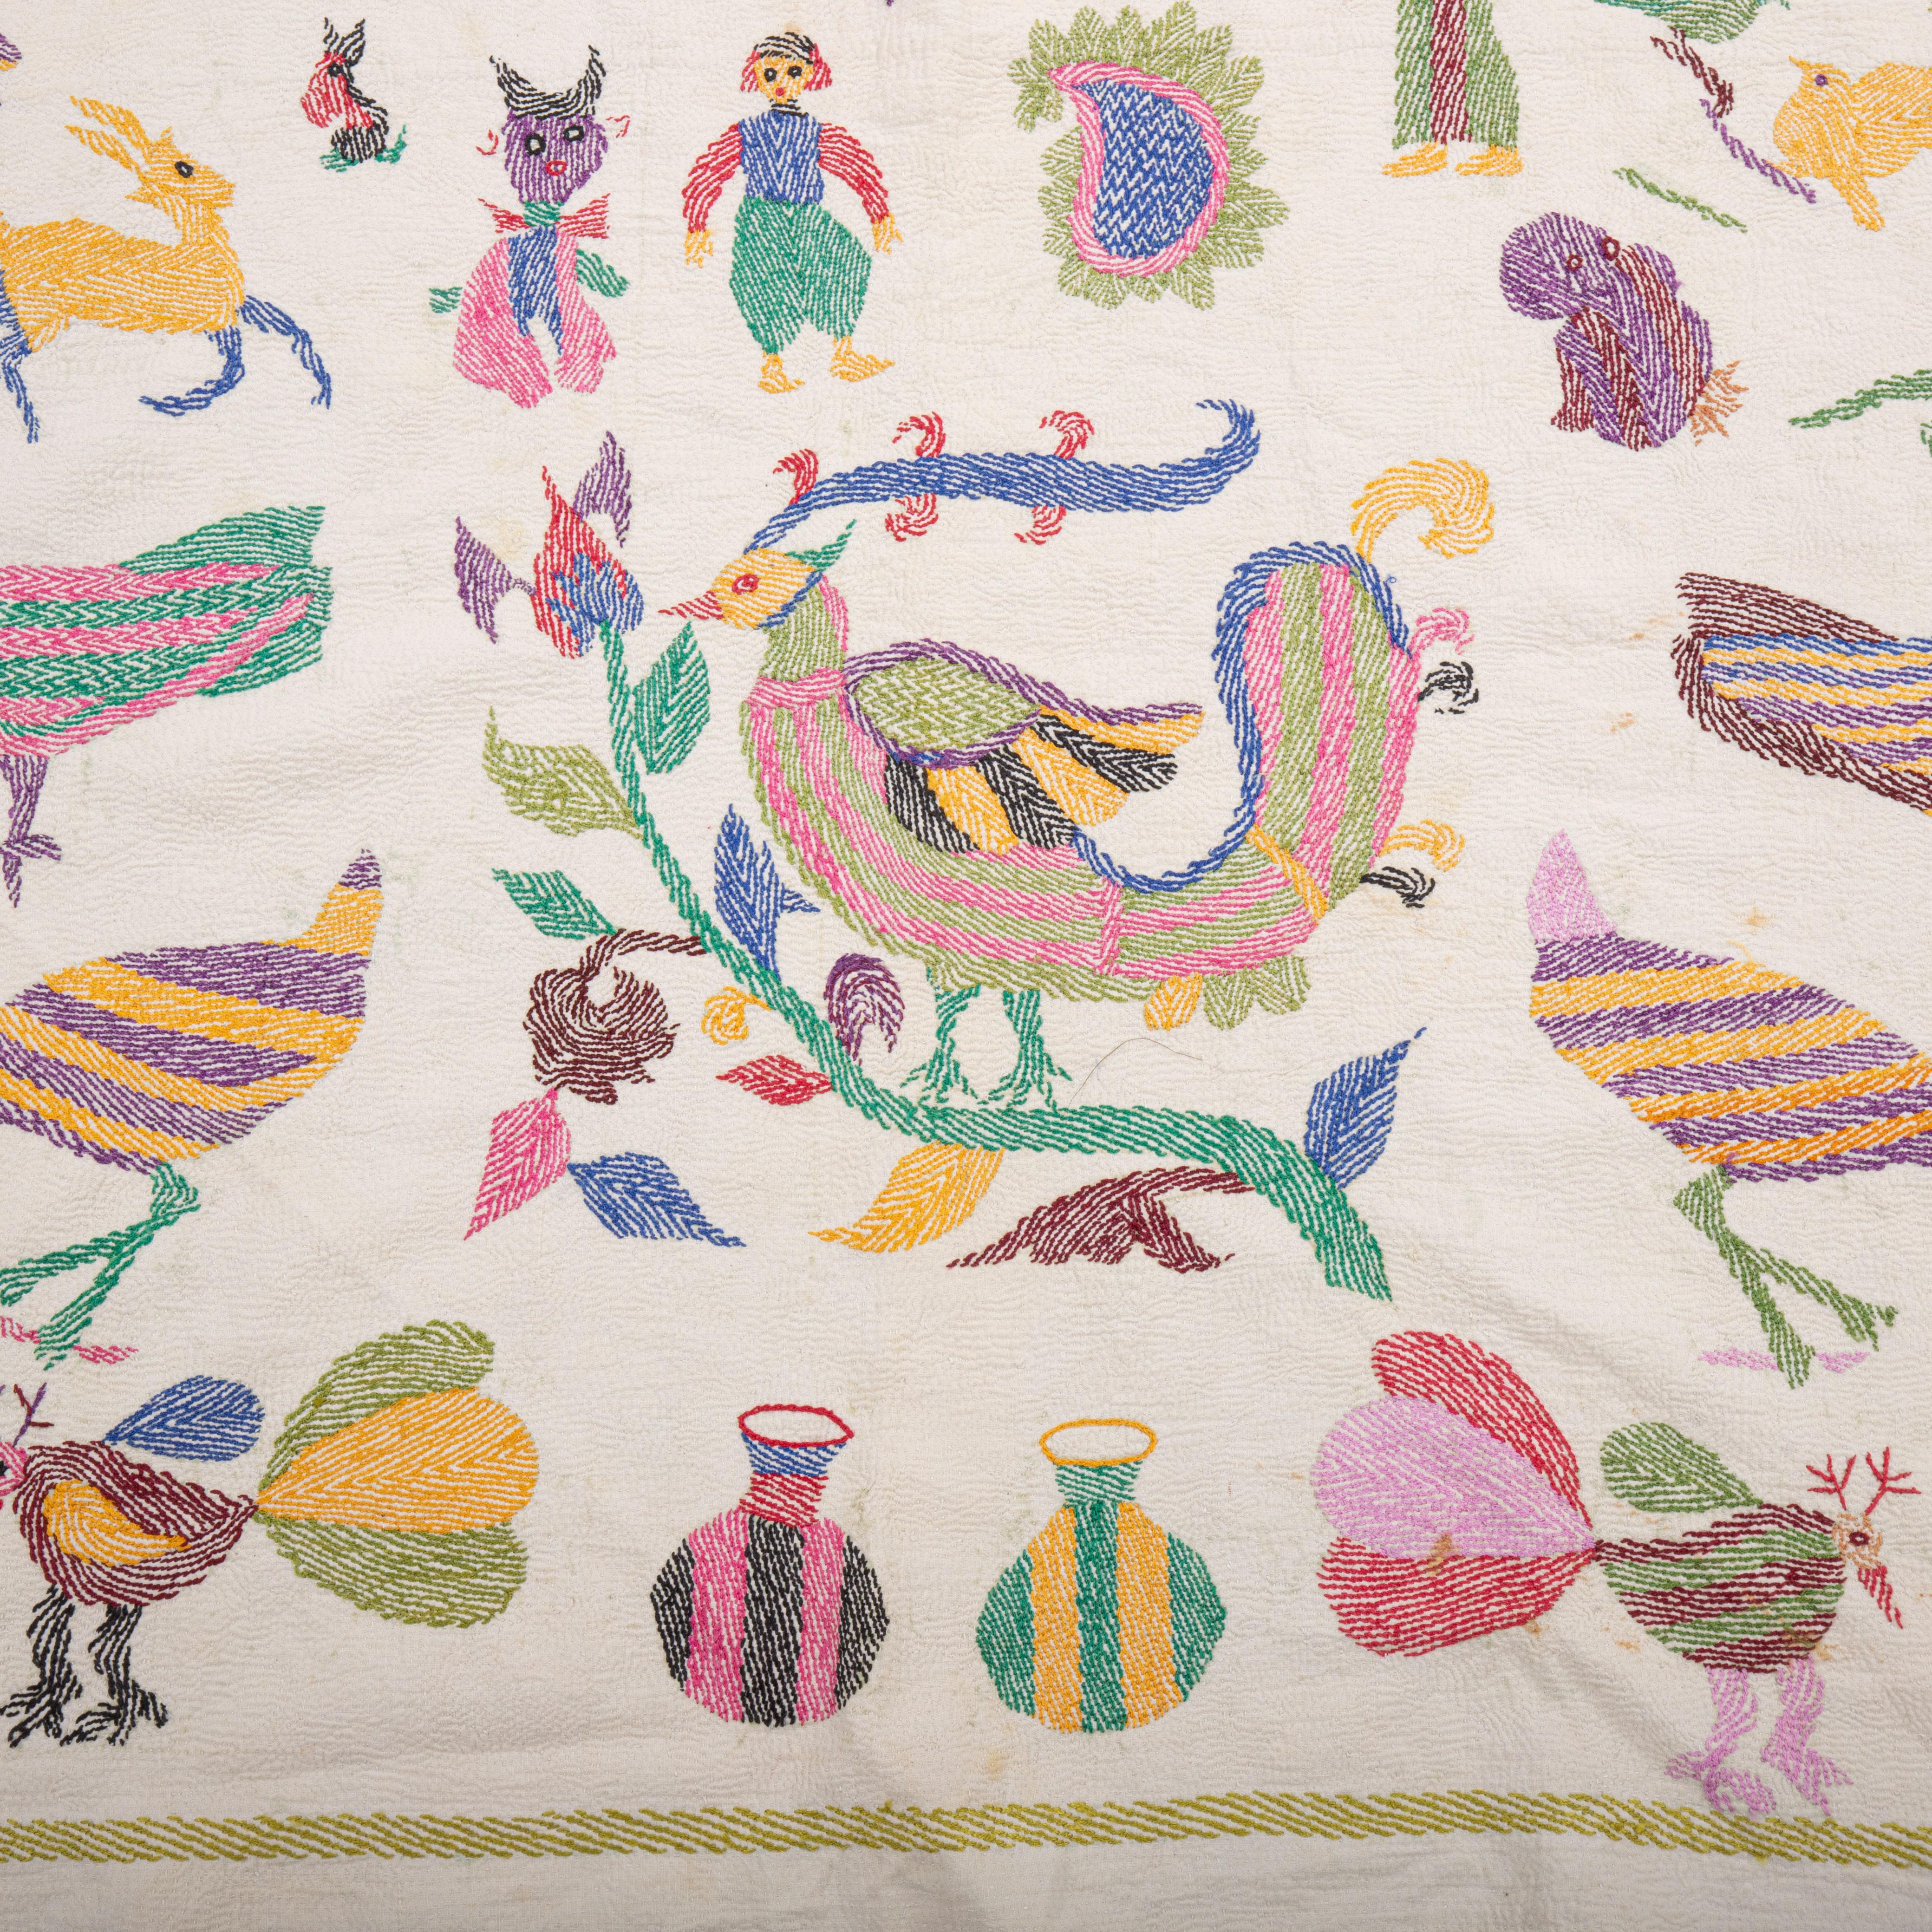 Embroidered Bengal Kantha quilt, Mid 20th C. For Sale